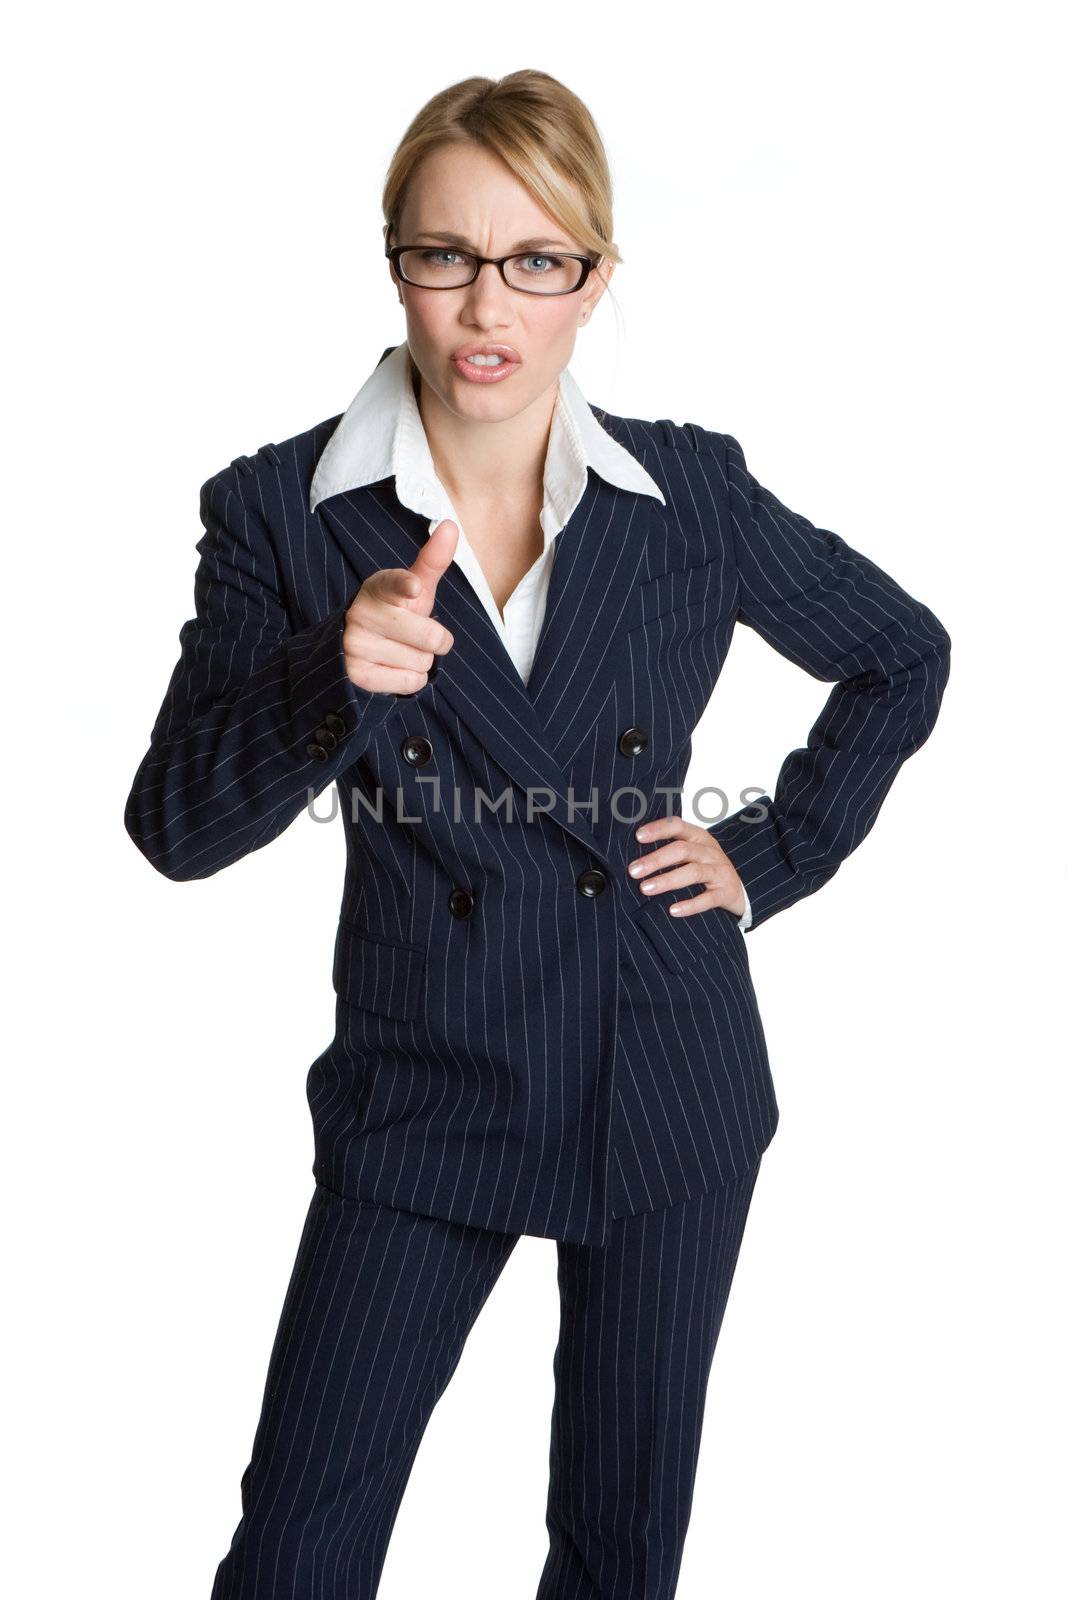 Isolated young angry businesswoman pointing